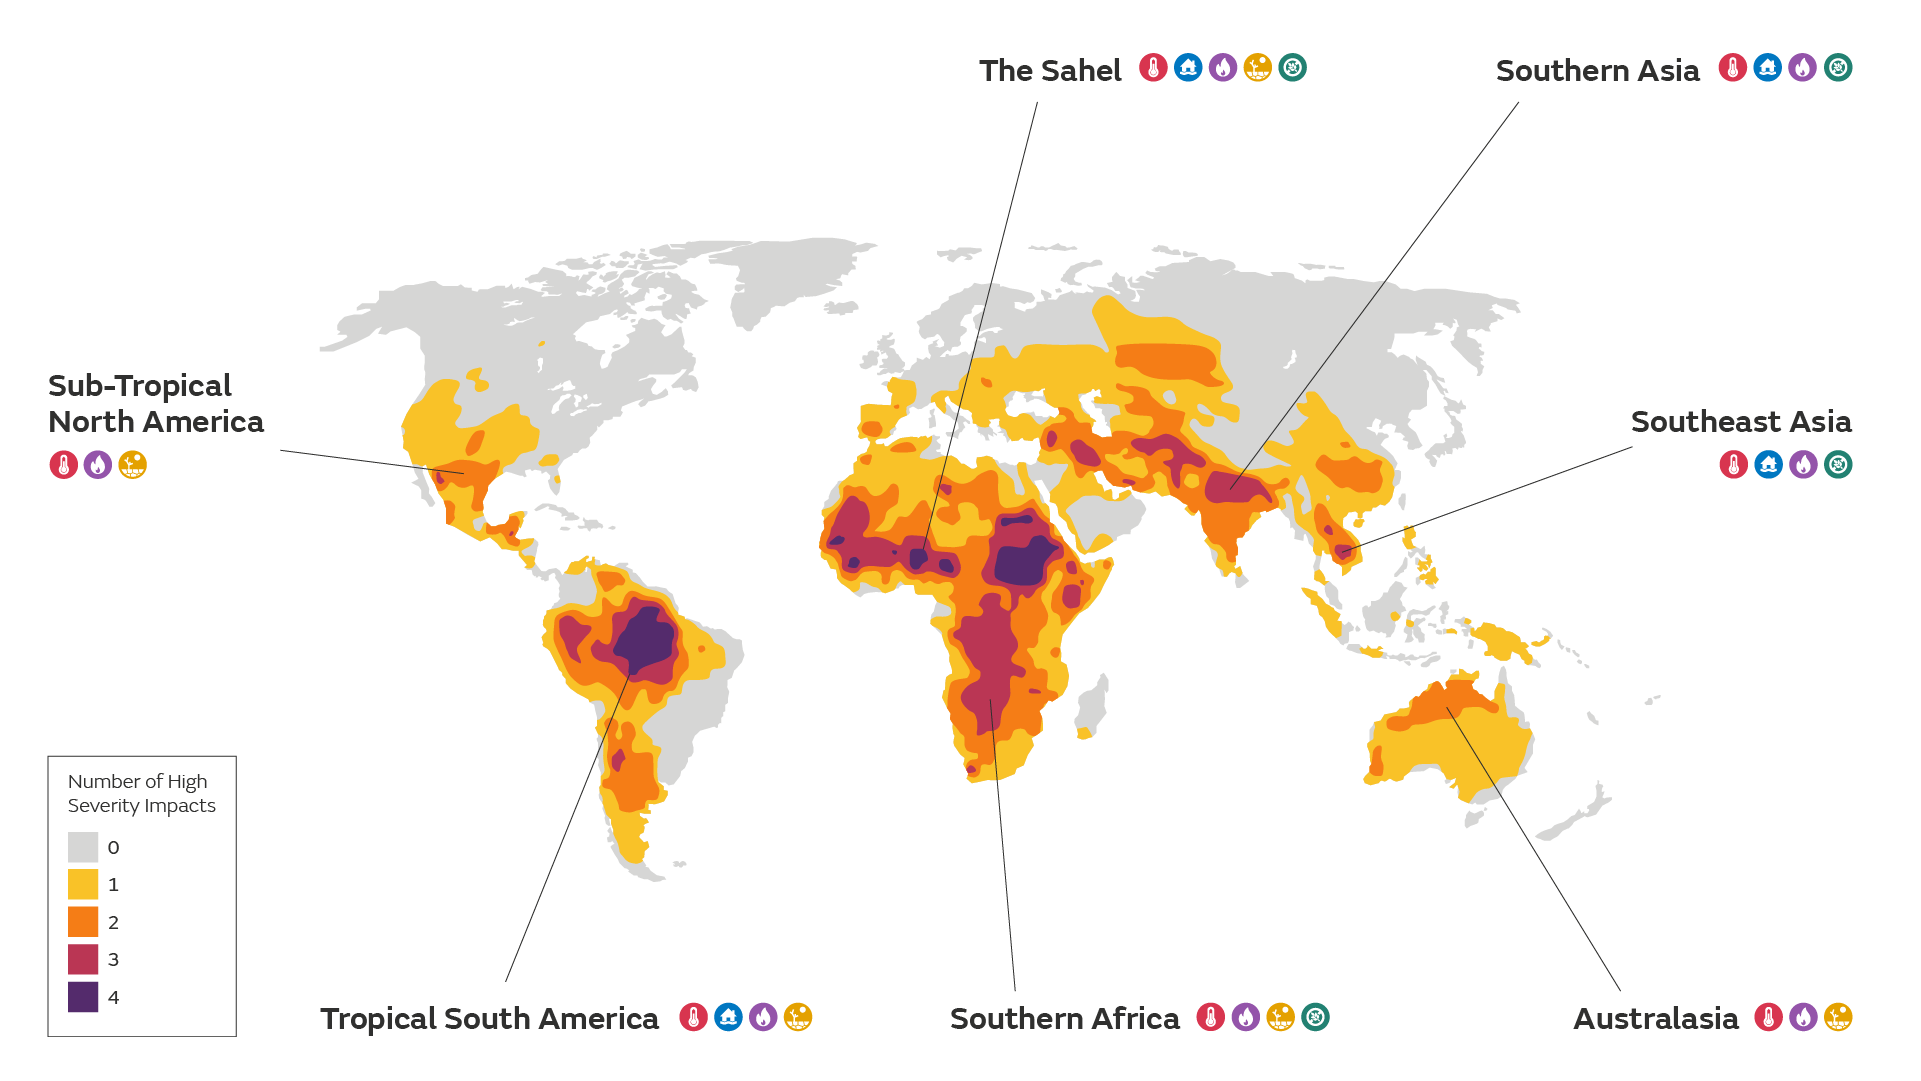 The map shows regions of the world where multiple severe impacts may occur at similar times at 4°C global warming. The regions are: Sub-Tropical North America, Tropical South America, the Sahel, Southern Africa, Southern Asia, Southeast Asia, and Australasia.